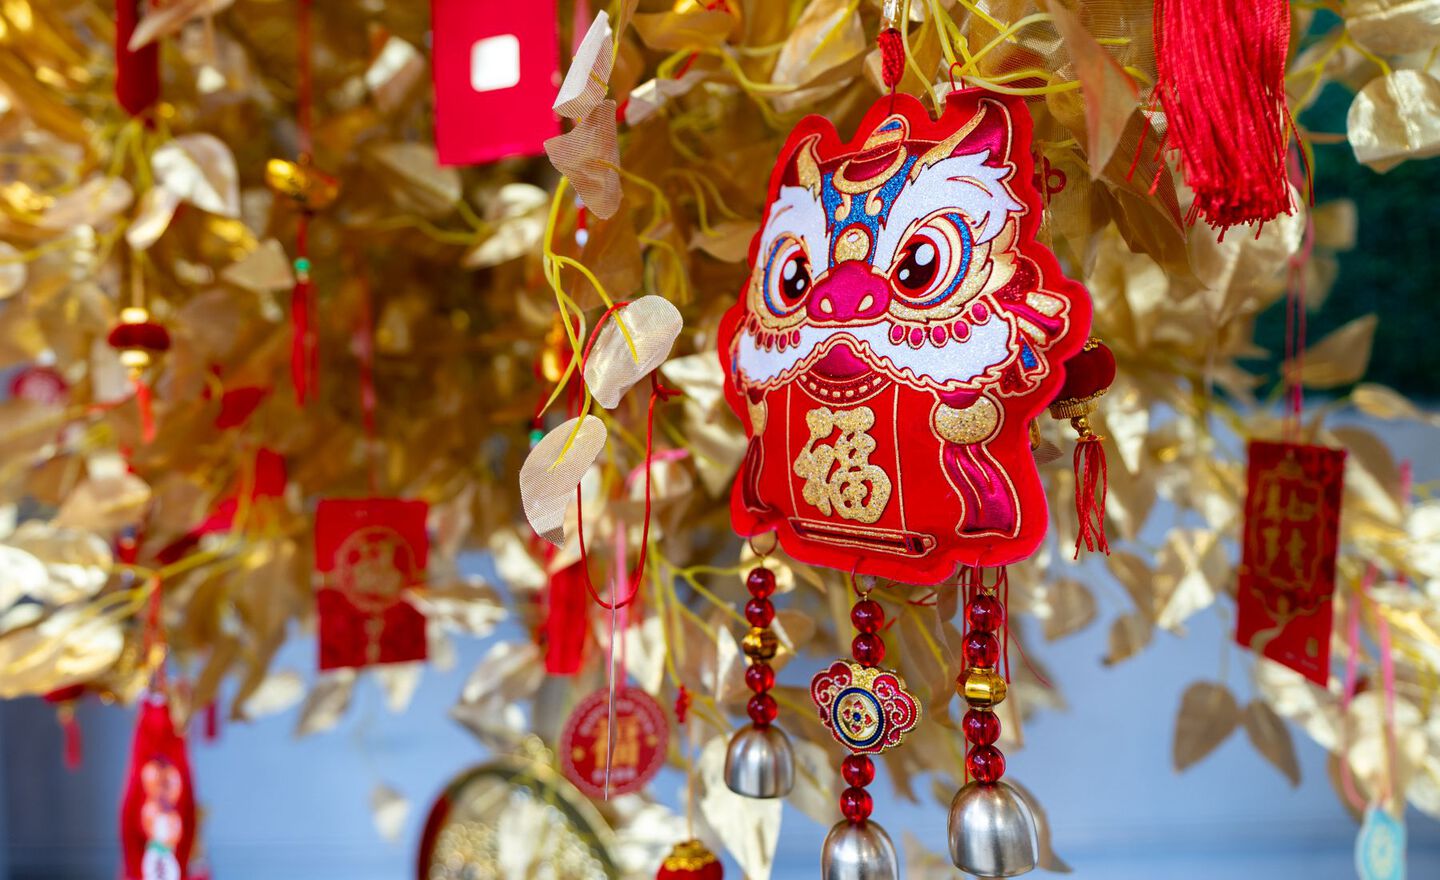 A red and yellow dragon ornament hanging in a golden tree